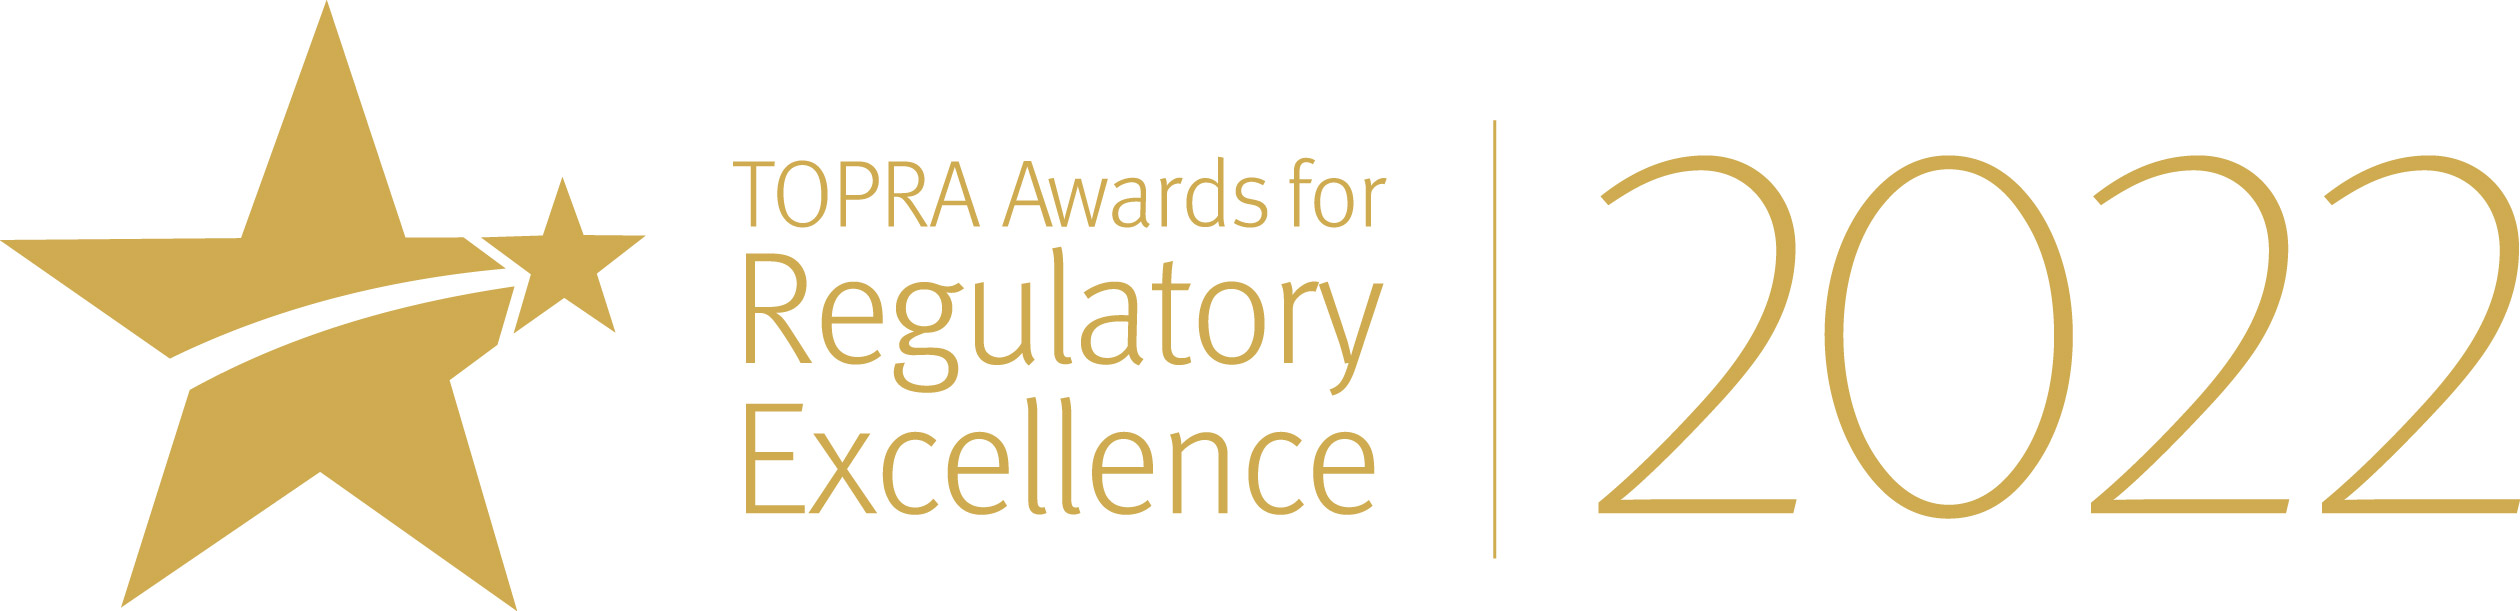 The Awards for Regulatory Excellence